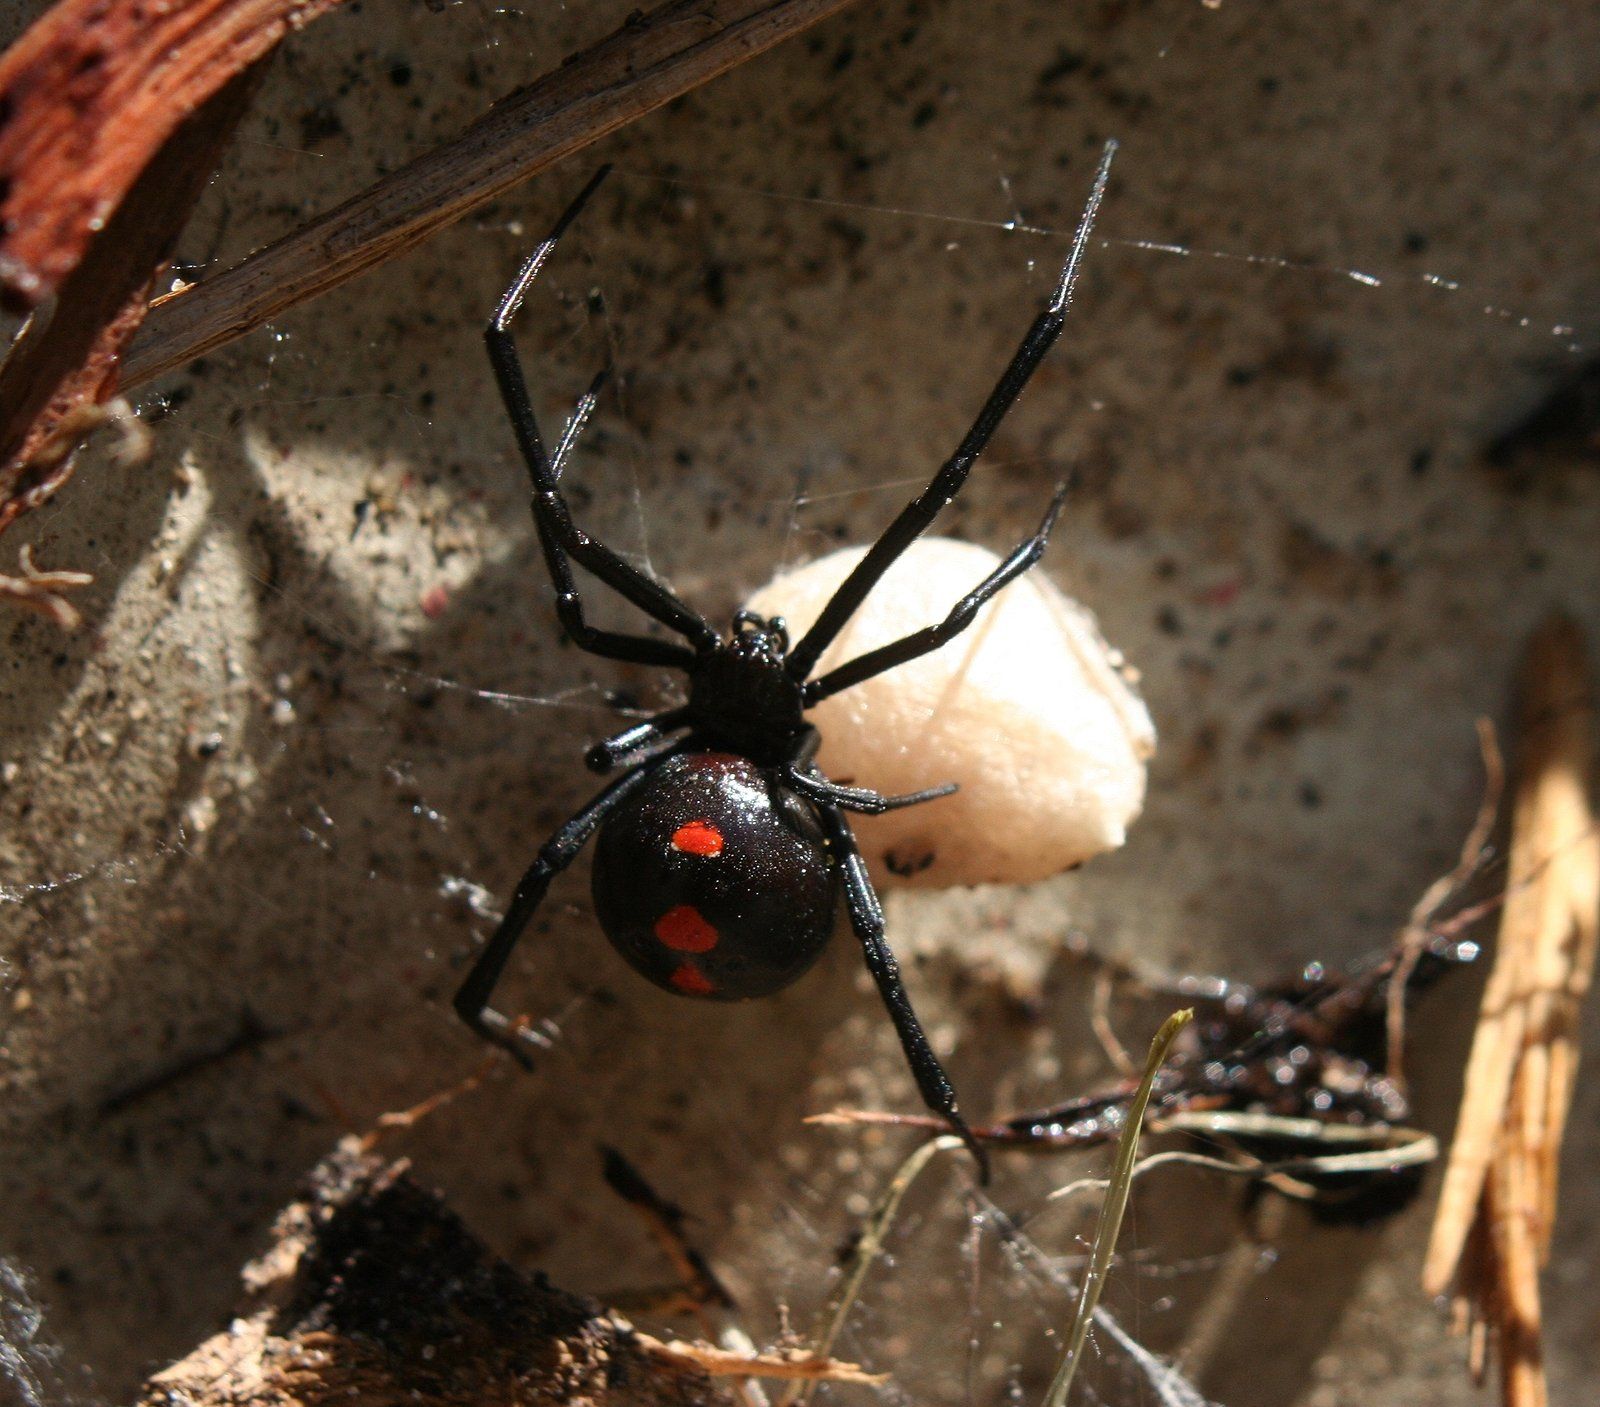 Spider Control Services Throughout Oklahoma